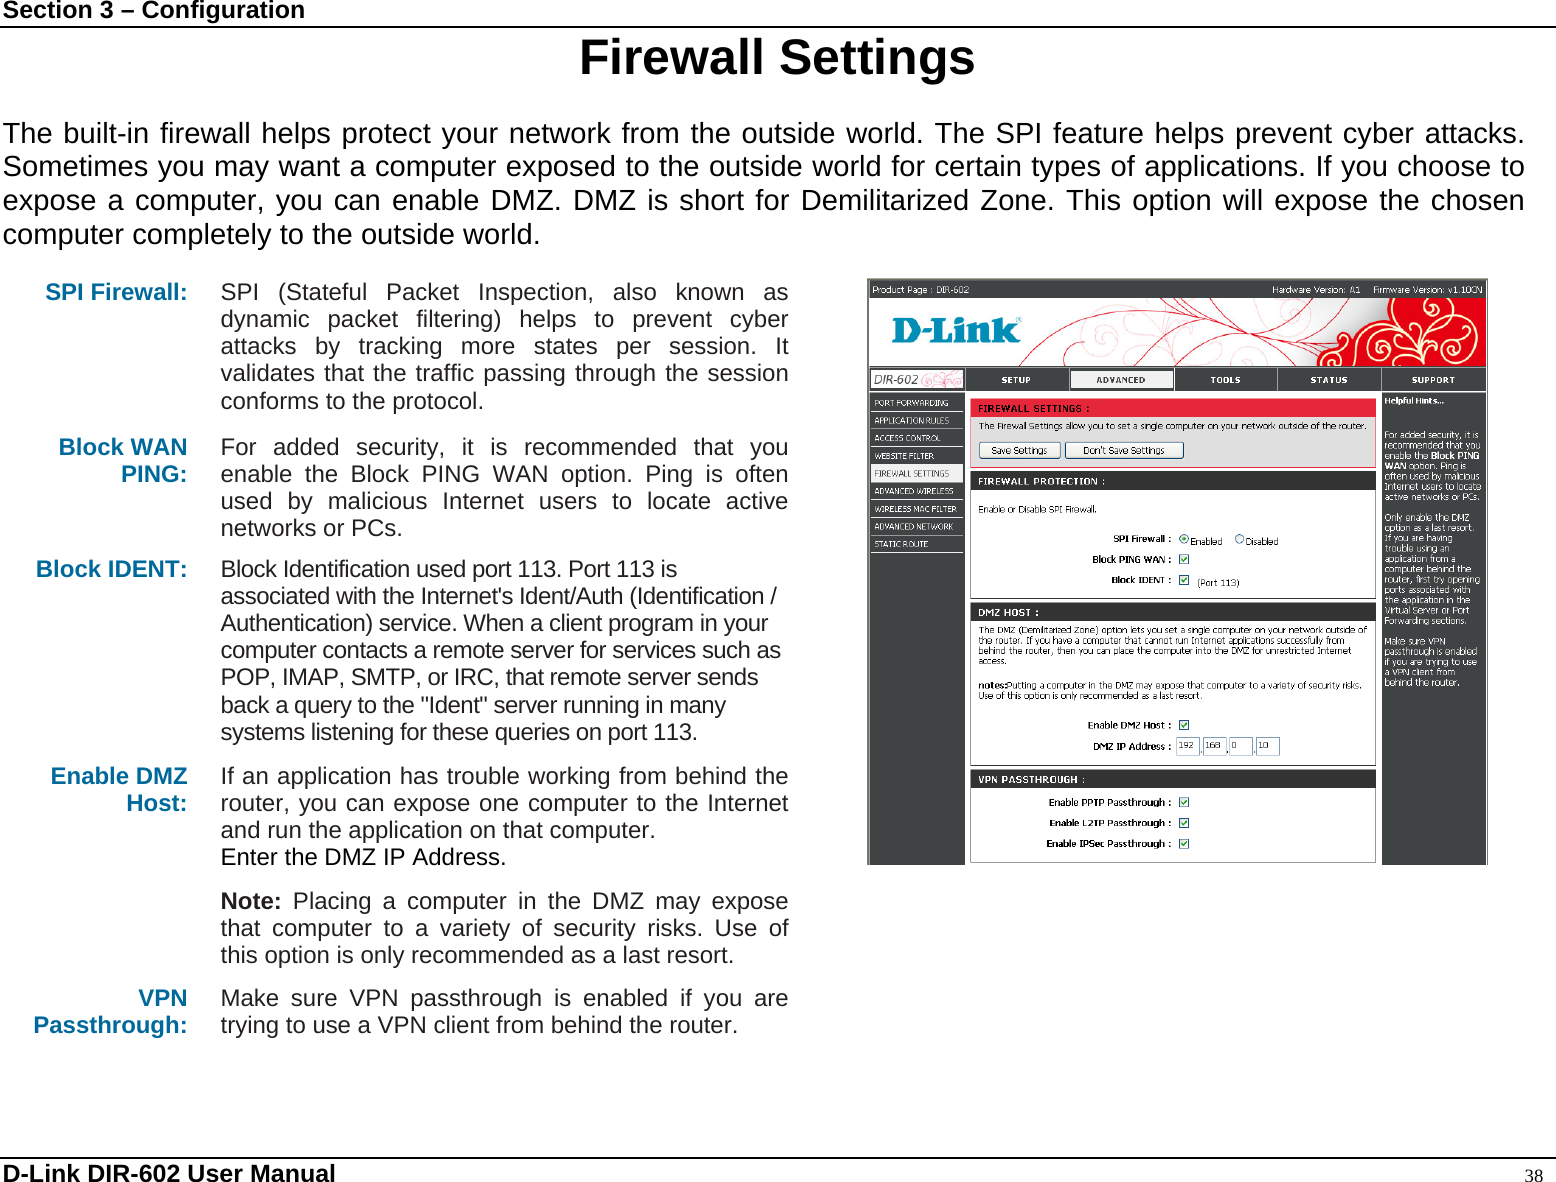 Section 3 – Configuration  Firewall Settings  The built-in firewall helps protect your network from the outside world. The SPI feature helps prevent cyber attacks. Sometimes you may want a computer exposed to the outside world for certain types of applications. If you choose to expose a computer, you can enable DMZ. DMZ is short for Demilitarized Zone. This option will expose the chosen computer completely to the outside world.  SPI Firewall:  SPI (Stateful Packet Inspection, also known as dynamic packet filtering) helps to prevent cyber attacks by tracking more states per session. It validates that the traffic passing through the session conforms to the protocol. Block WAN   PING:   For added security, it is recommended that you enable the Block PING WAN option. Ping is often used by malicious Internet users to locate active networks or PCs. Block IDENT: Block Identification used port 113. Port 113 is associated with the Internet&apos;s Ident/Auth (Identification / Authentication) service. When a client program in your computer contacts a remote server for services such as POP, IMAP, SMTP, or IRC, that remote server sends back a query to the &quot;Ident&quot; server running in many systems listening for these queries on port 113. Enable DMZ Host:    If an application has trouble working from behind the router, you can expose one computer to the Internet and run the application on that computer. Enter the DMZ IP Address.  Note: Placing a computer in the DMZ may expose that computer to a variety of security risks. Use of this option is only recommended as a last resort. VPN Passthrough:  Make sure VPN passthrough is enabled if you are trying to use a VPN client from behind the router.  D-Link DIR-602 User Manual                                                                                               38 